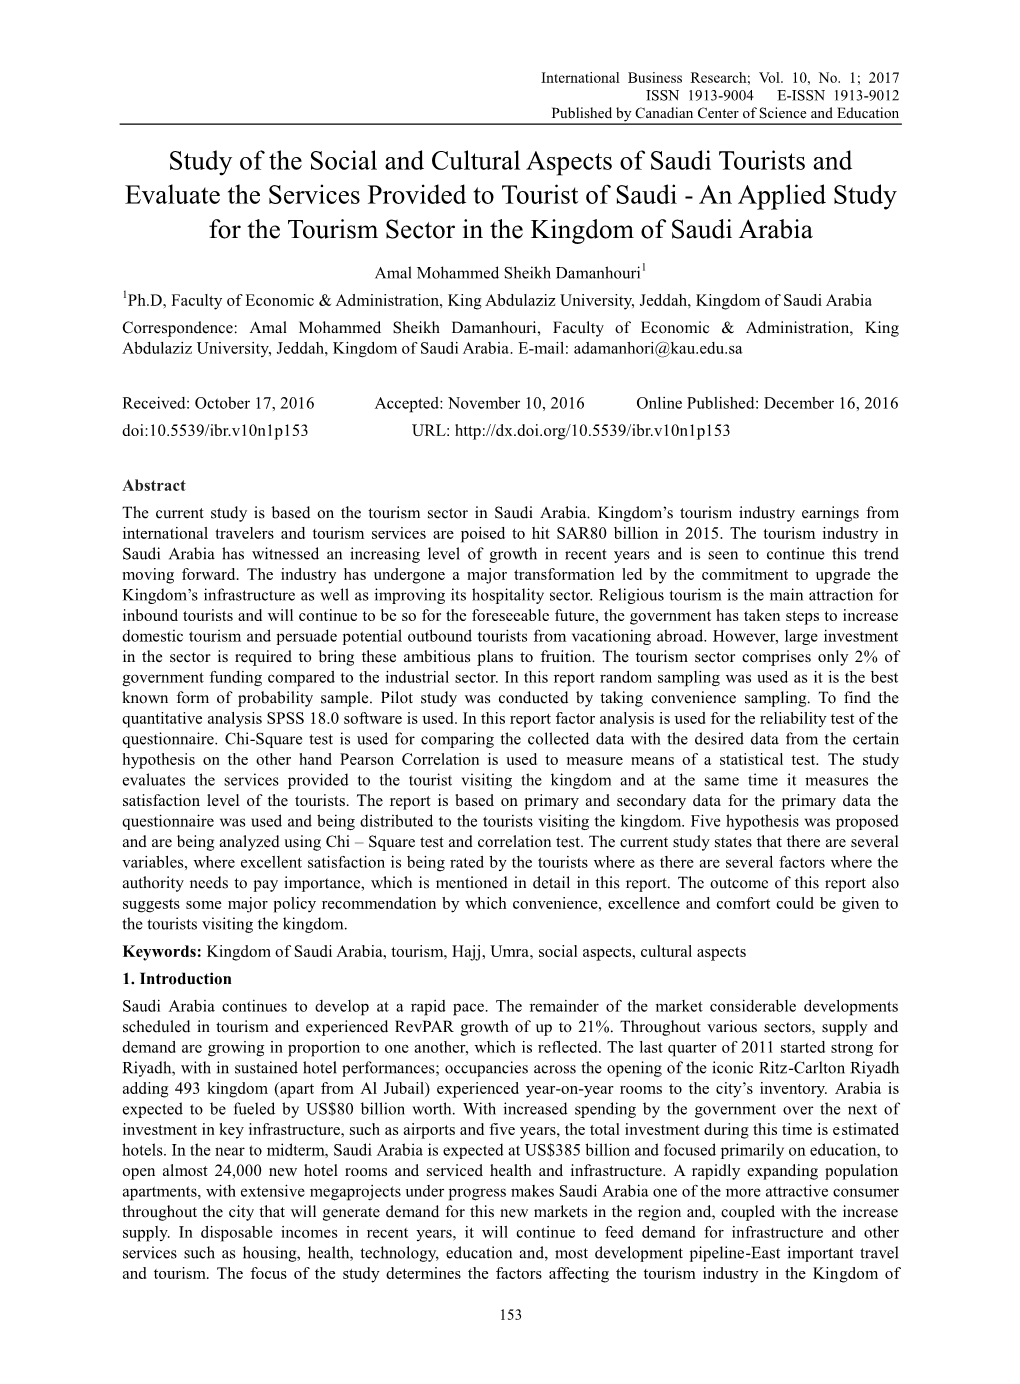 Study of the Social and Cultural Aspects of Saudi Tourists And